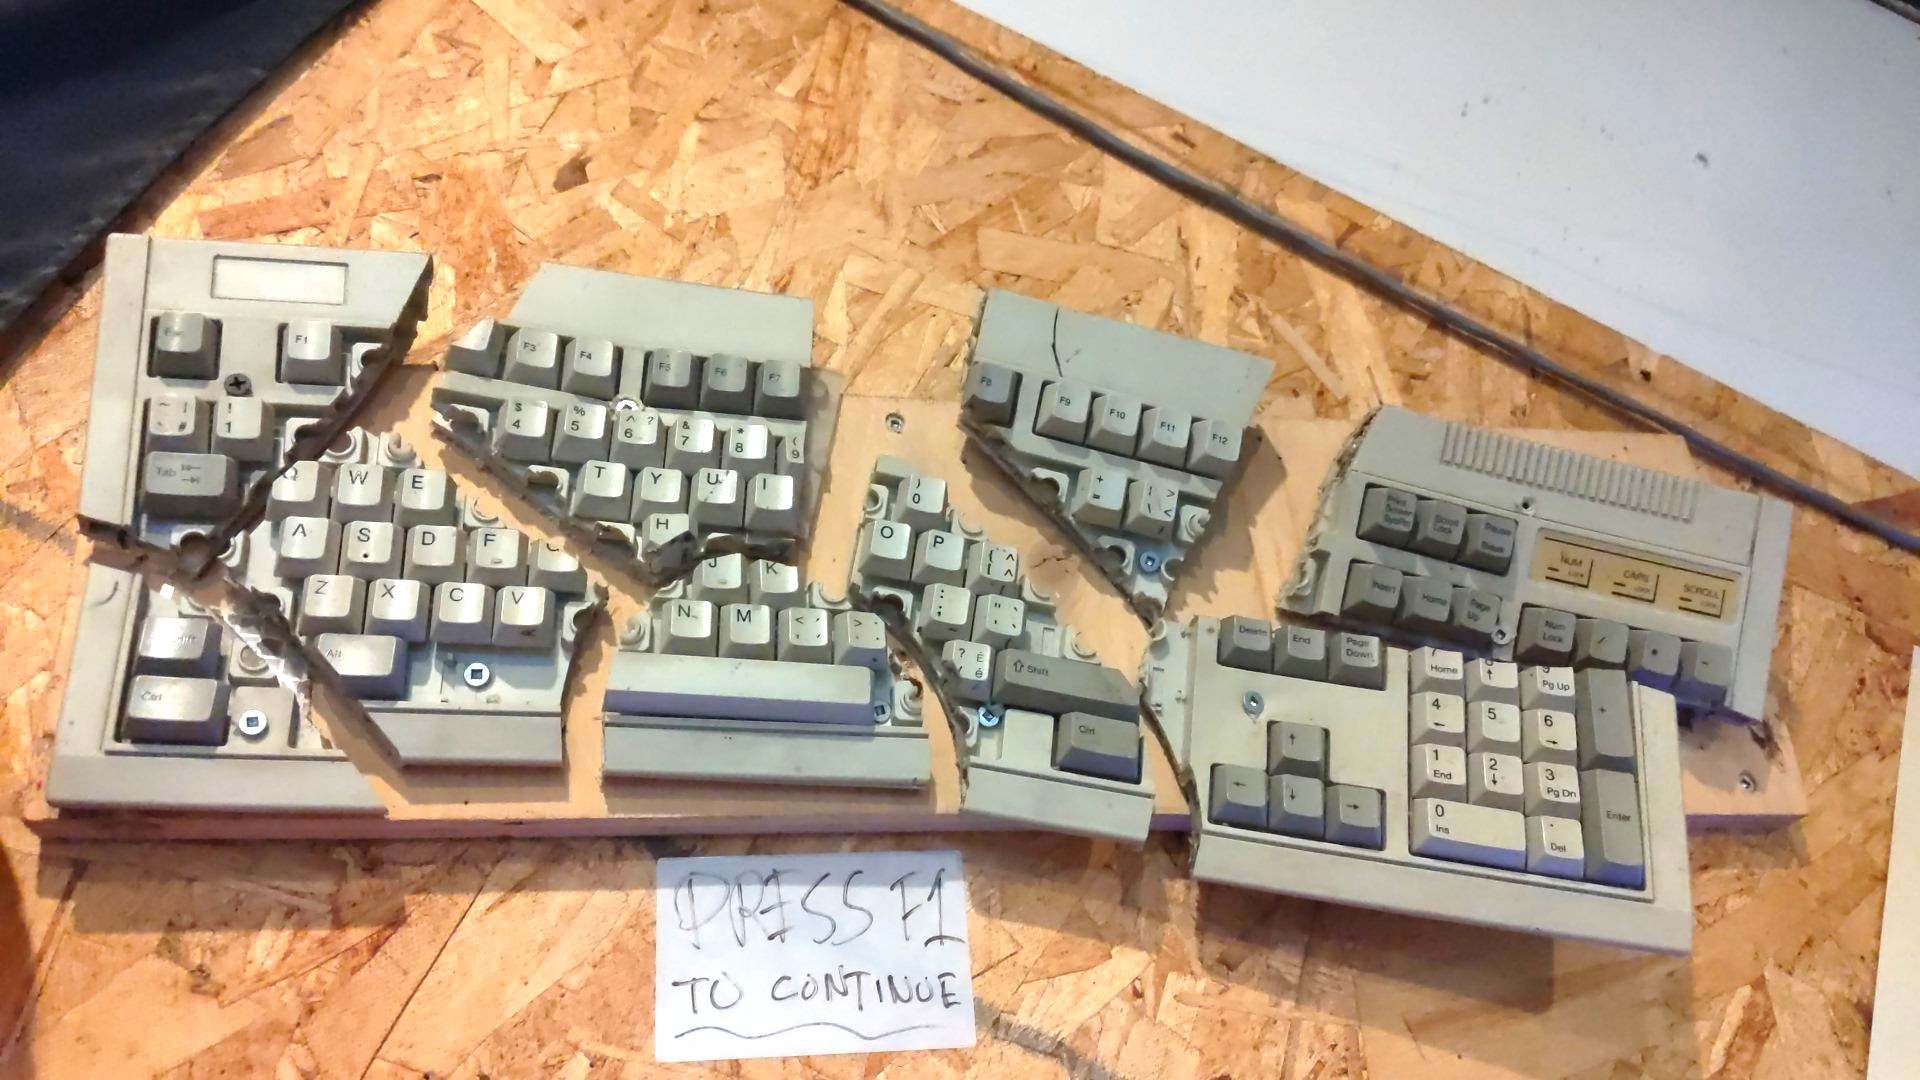 An exploded keyboard with a 'Press F1 to continue' sign